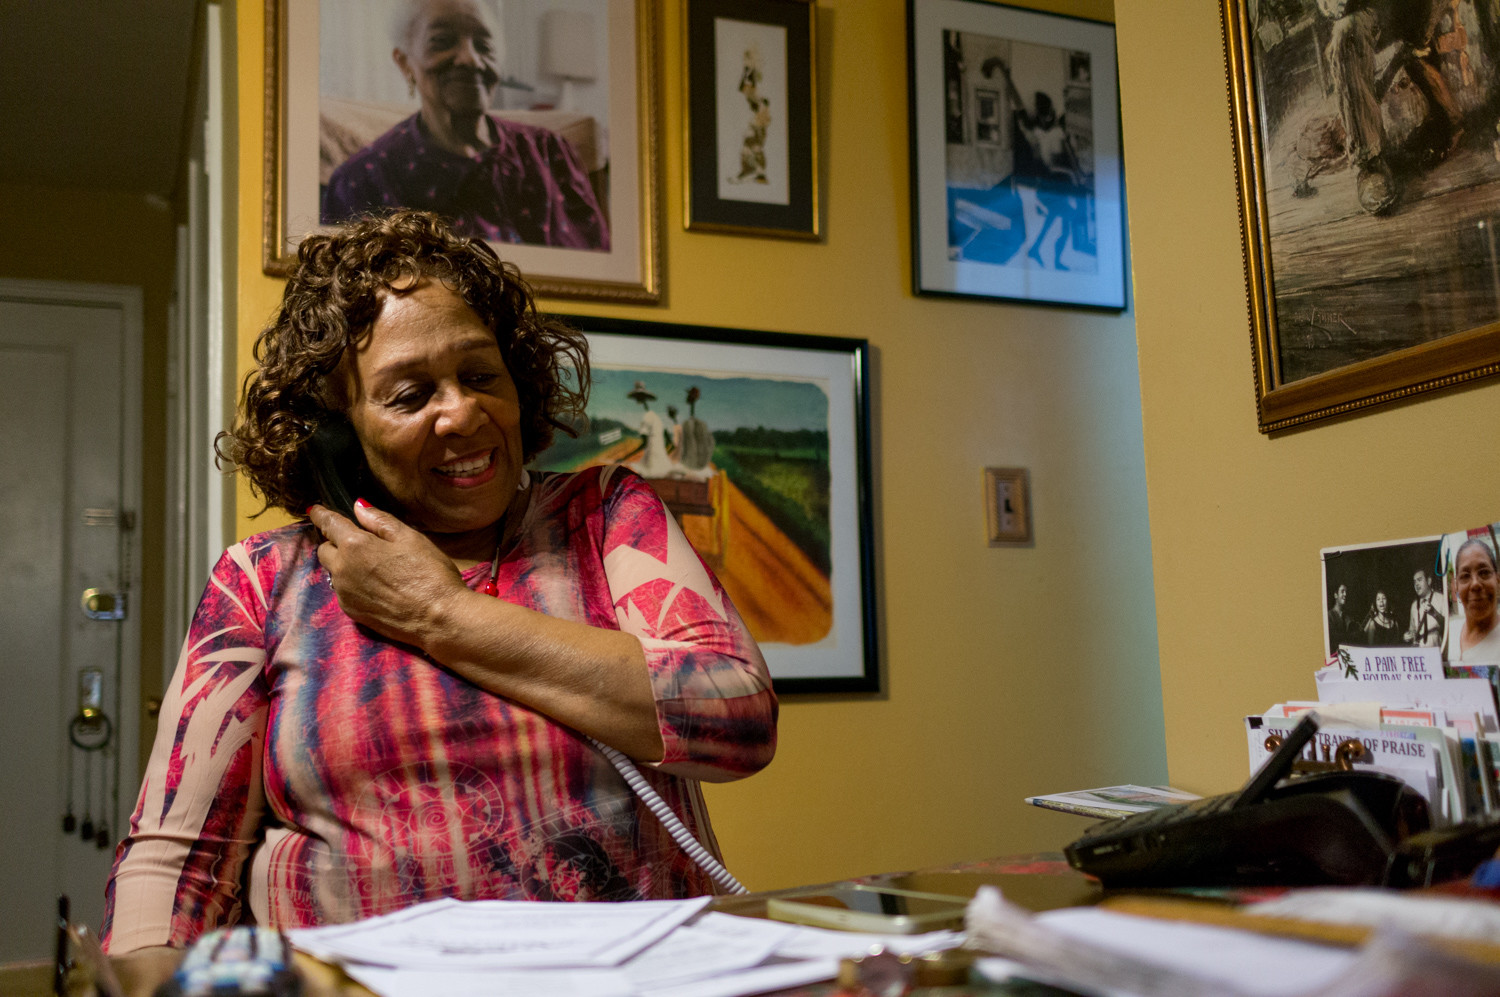 Delores Dixon takes a phone call in her home. A folk singer who practices tai chi and line dancing — and has been a Riverdale resident for the last 41 years — Dixon deals with ‘what some would call ‘vertigo,’’ she said, a condition of frequent dizziness and headaches, and hopes the New York Health Act won't make the health care process more confusing.